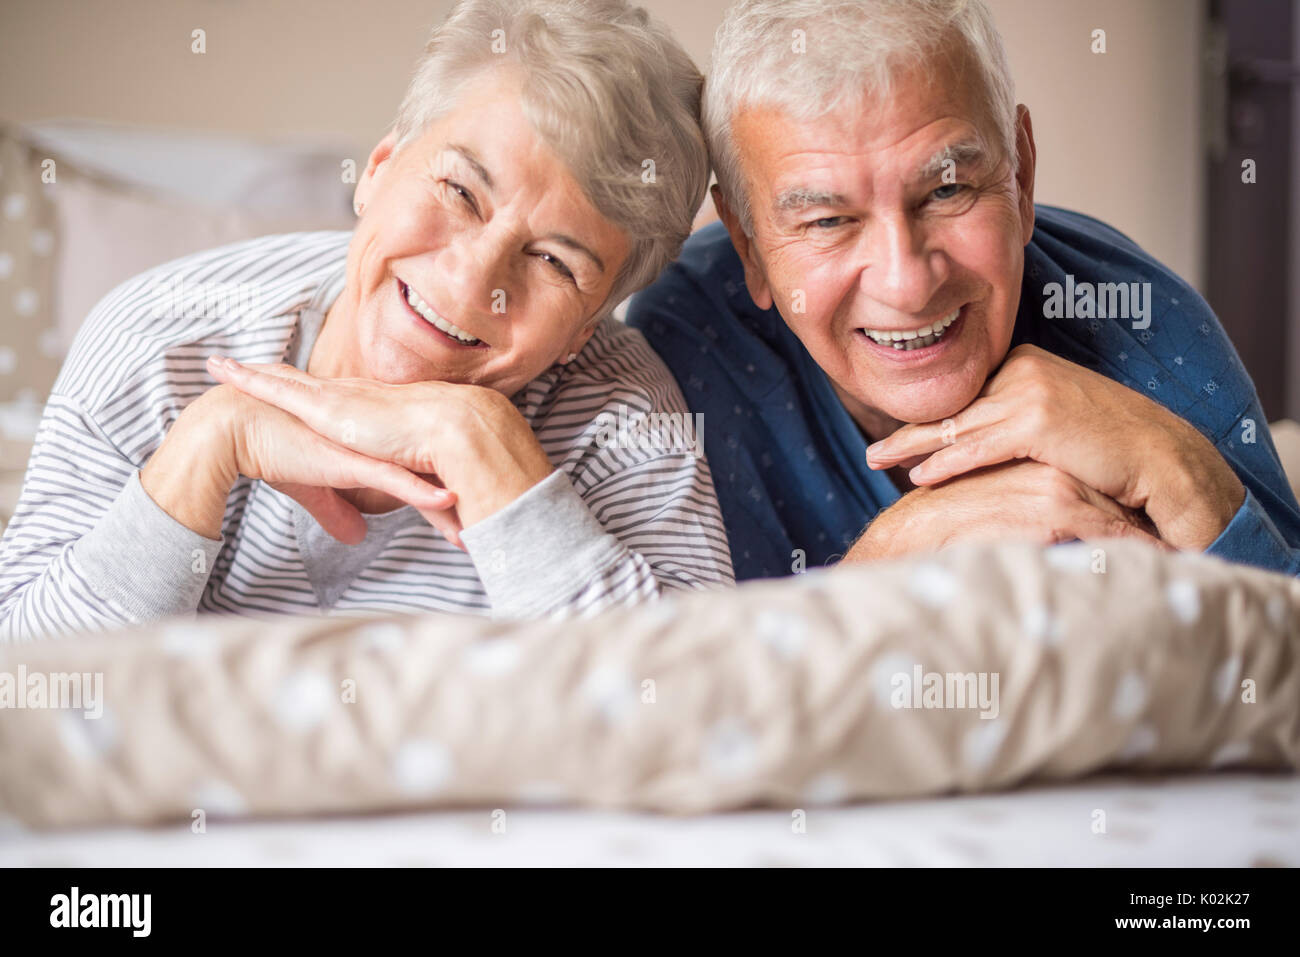 Portrait of cheerful senior adults in the bedroom Stock Photo